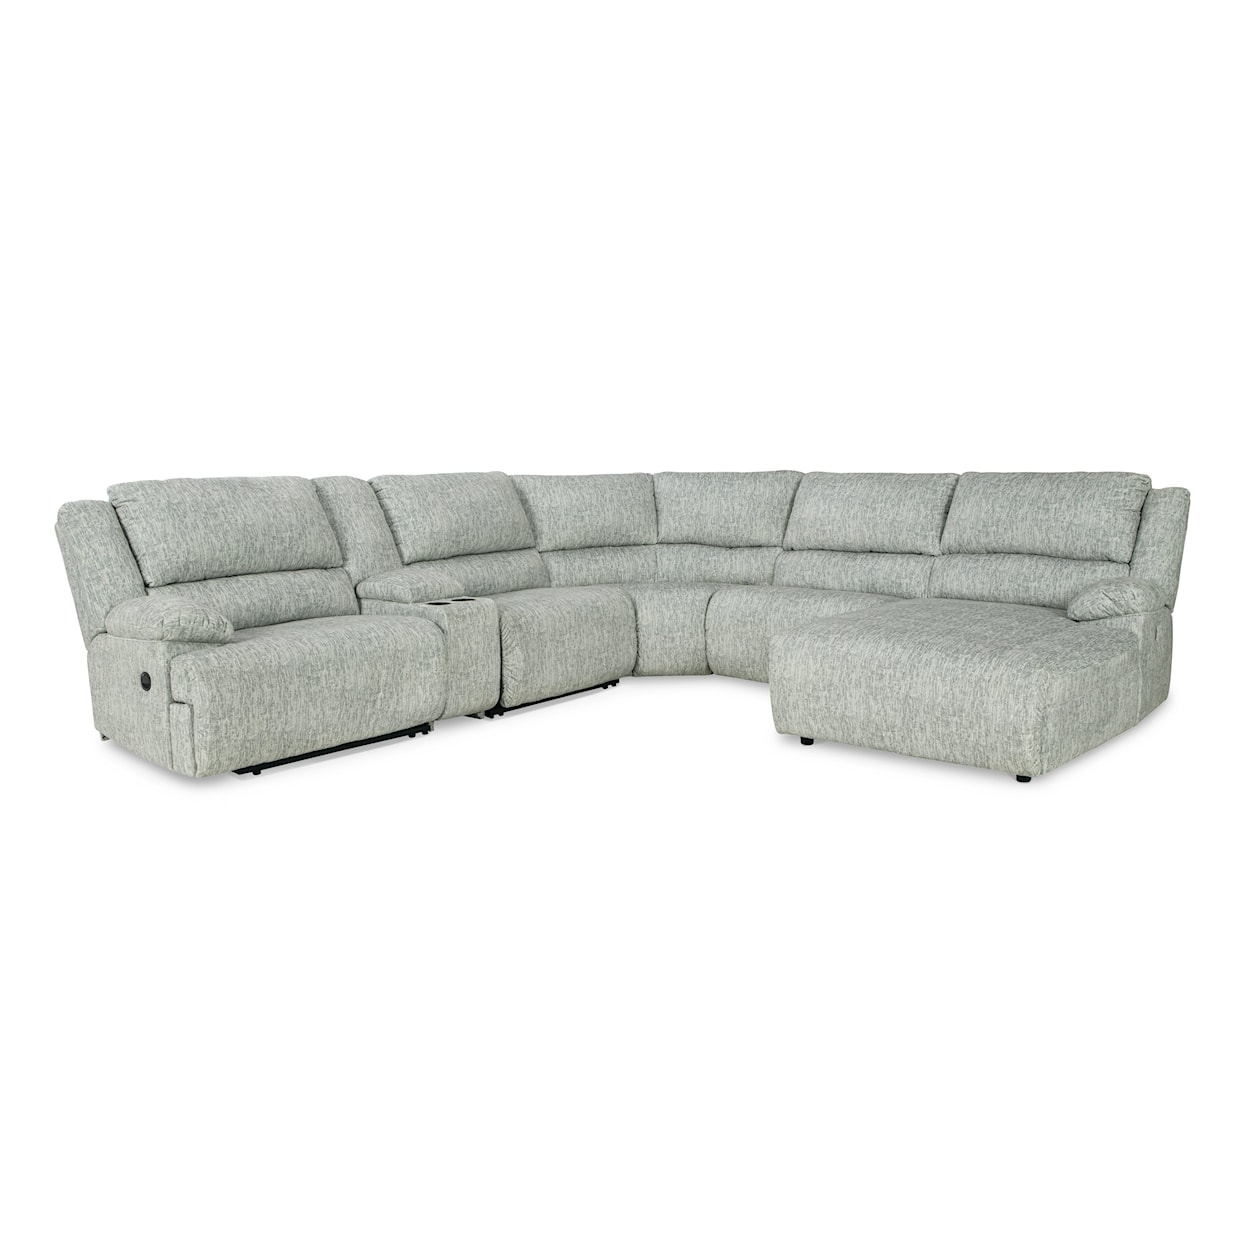 Benchcraft McClelland 6-Piece Reclining Sectional with Chaise